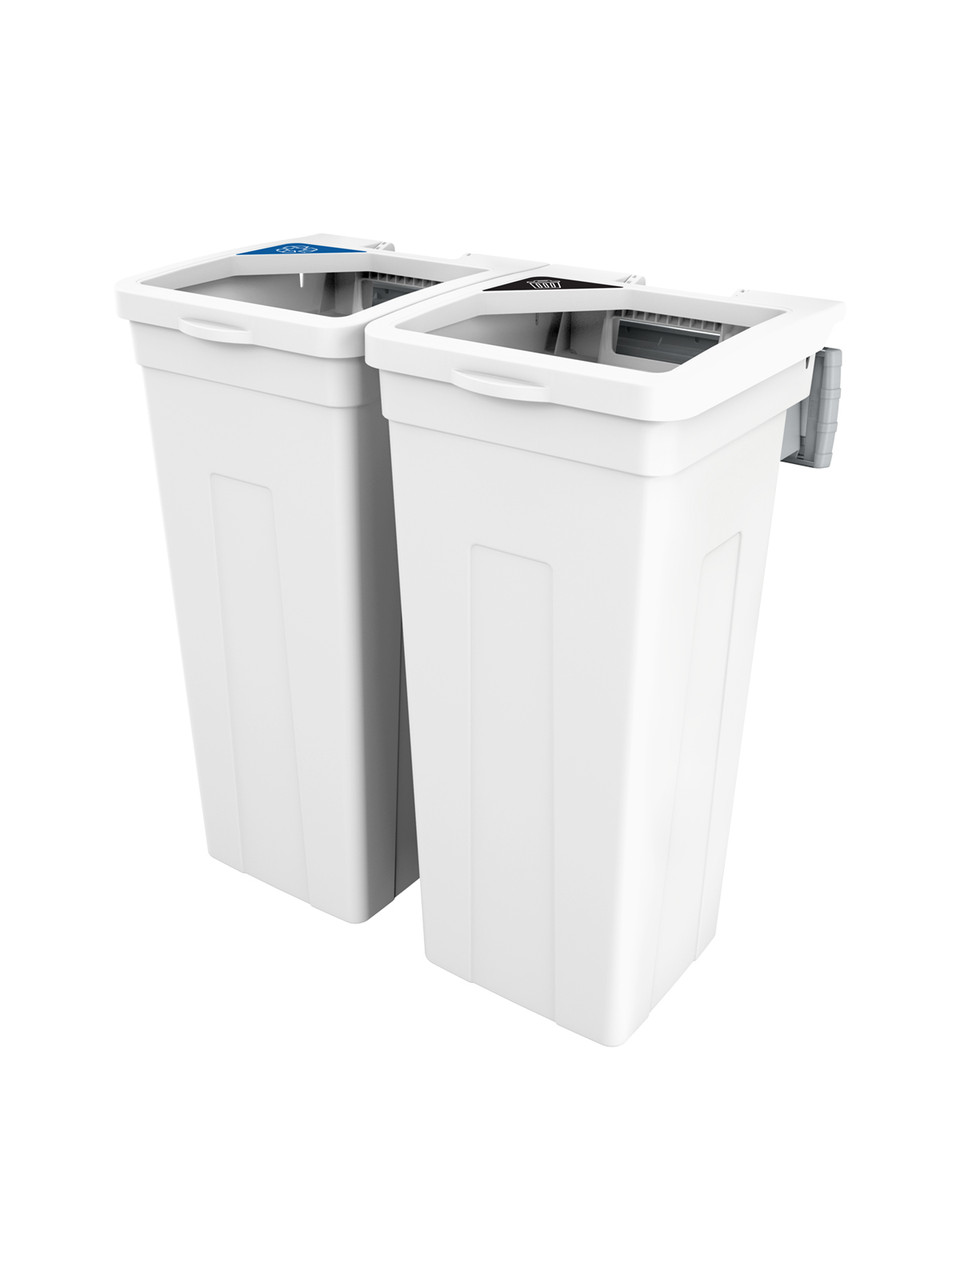 The Rise Double 30 Gallon Wall Mounted Waste Receptacles and Recycle Bins